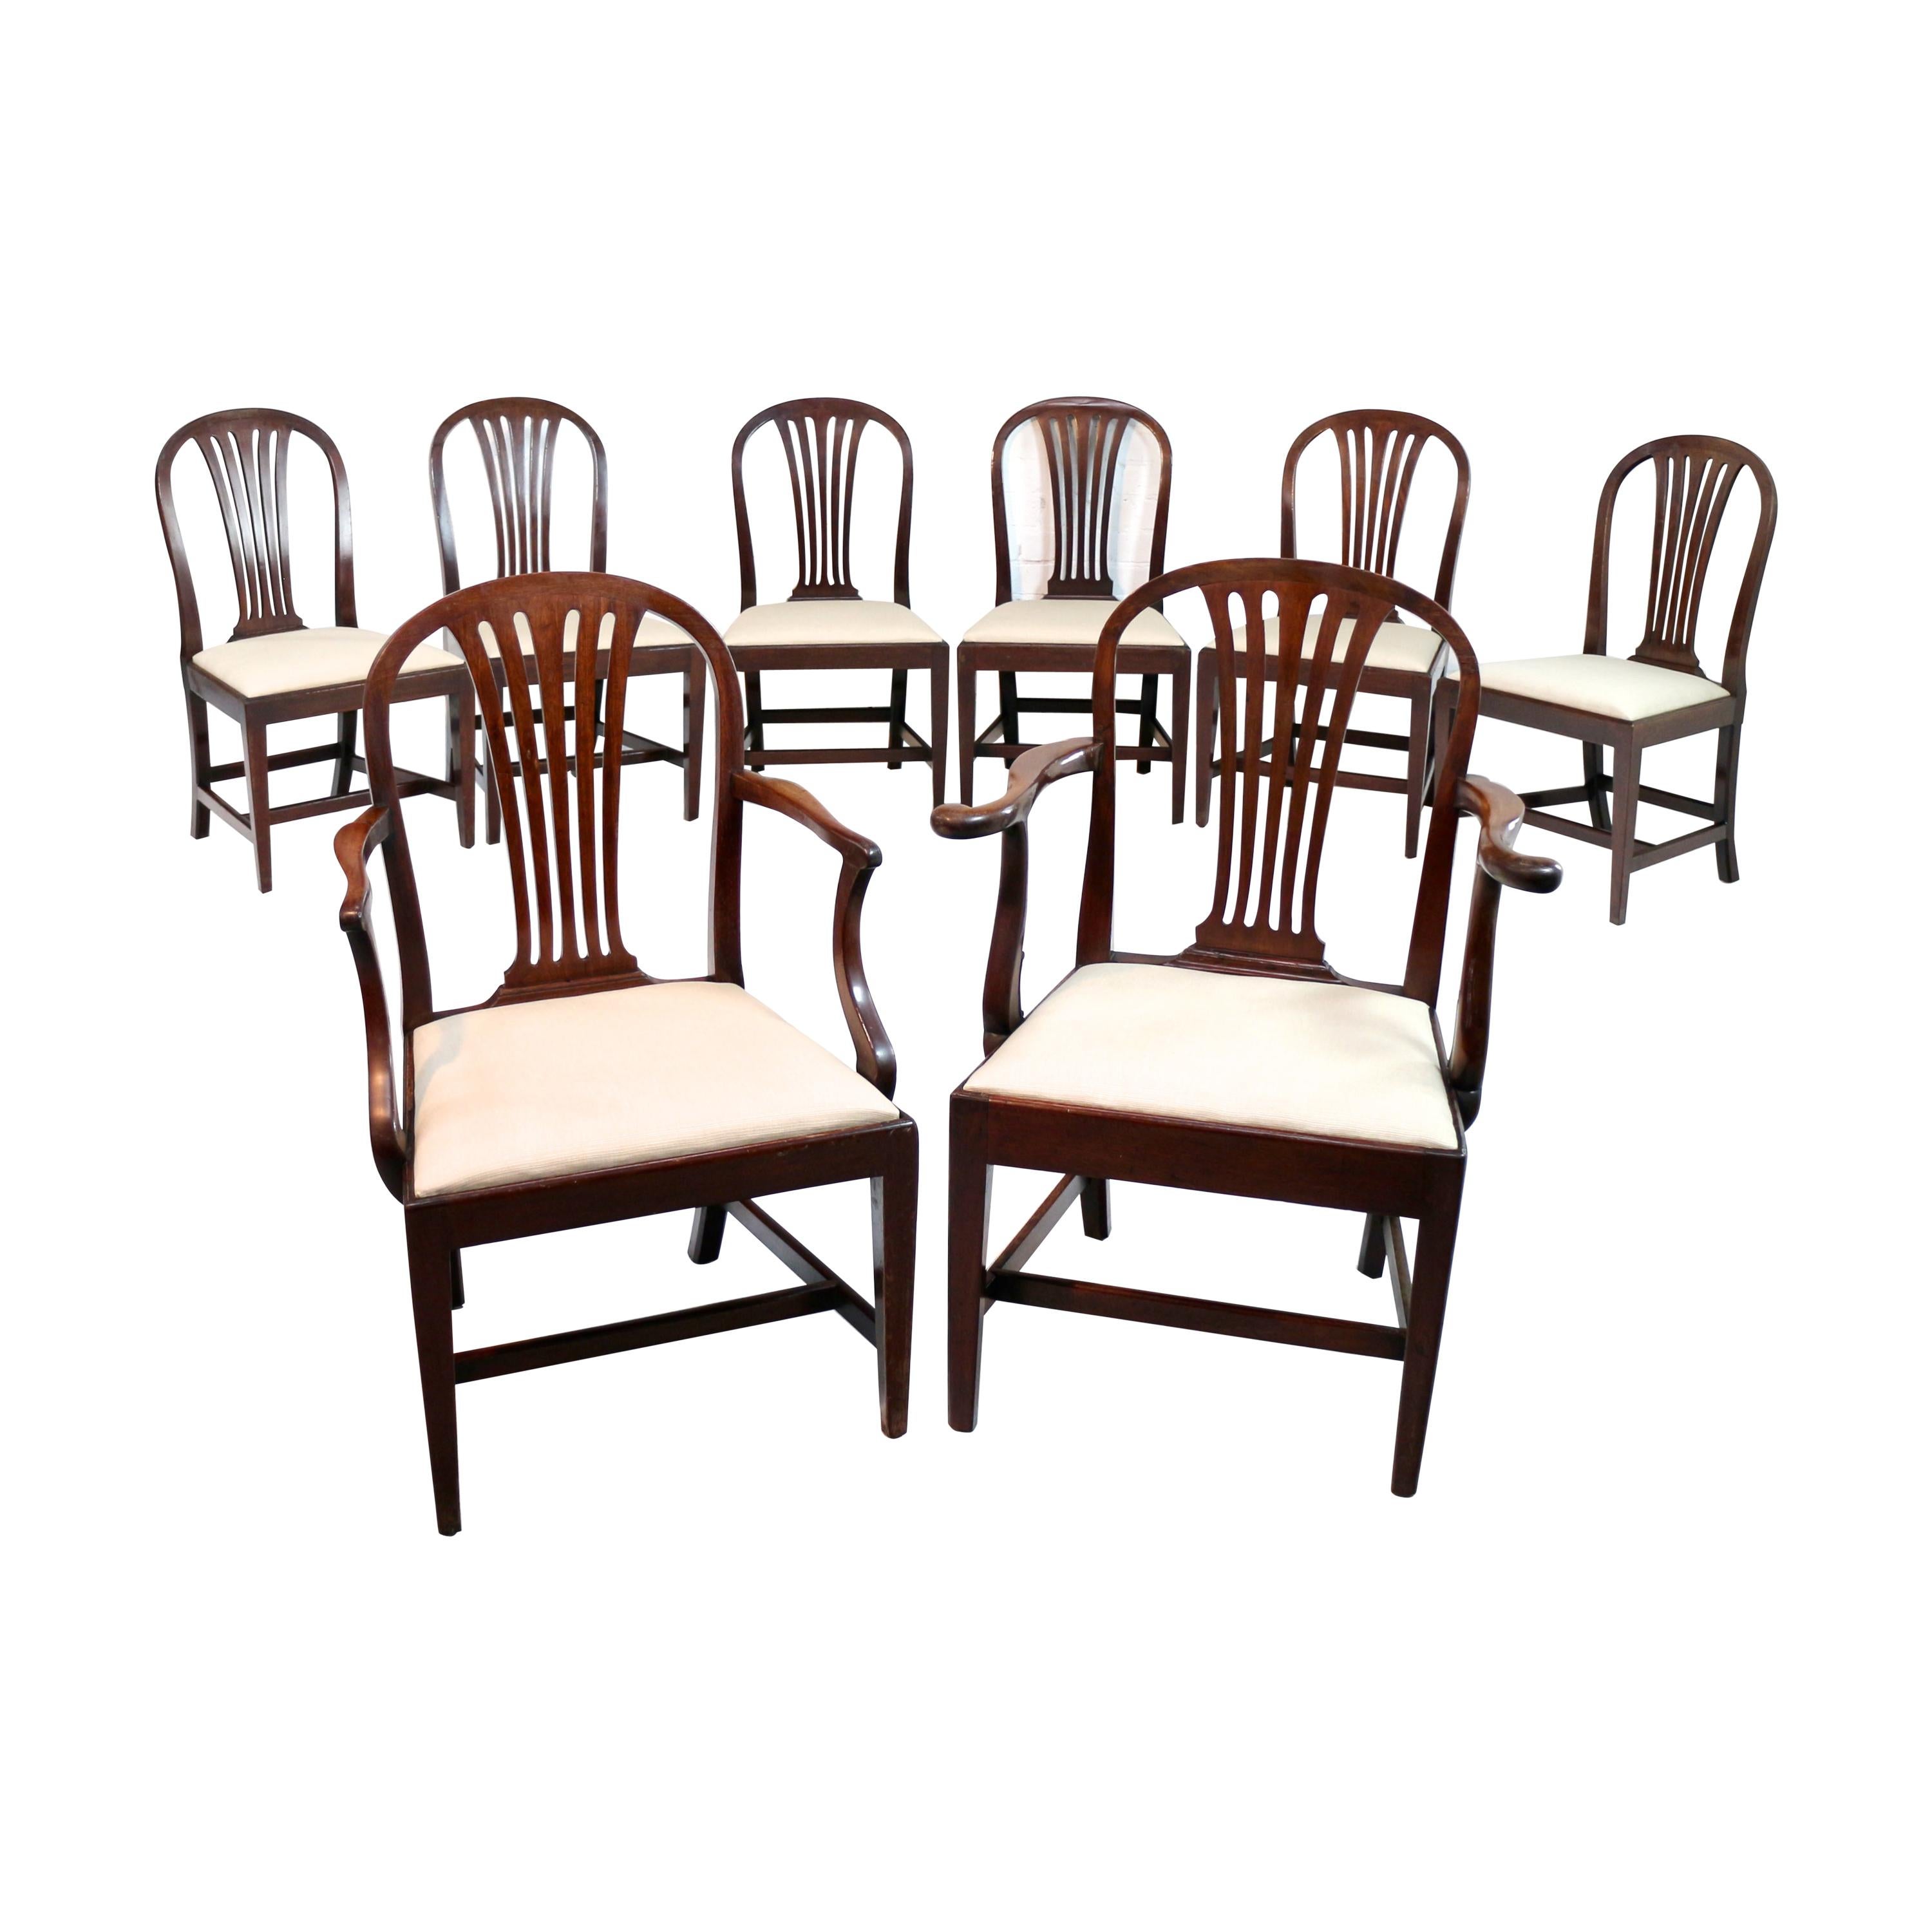 Set of 8 George III Gillows Mahogany Fan Back Dining Chairs